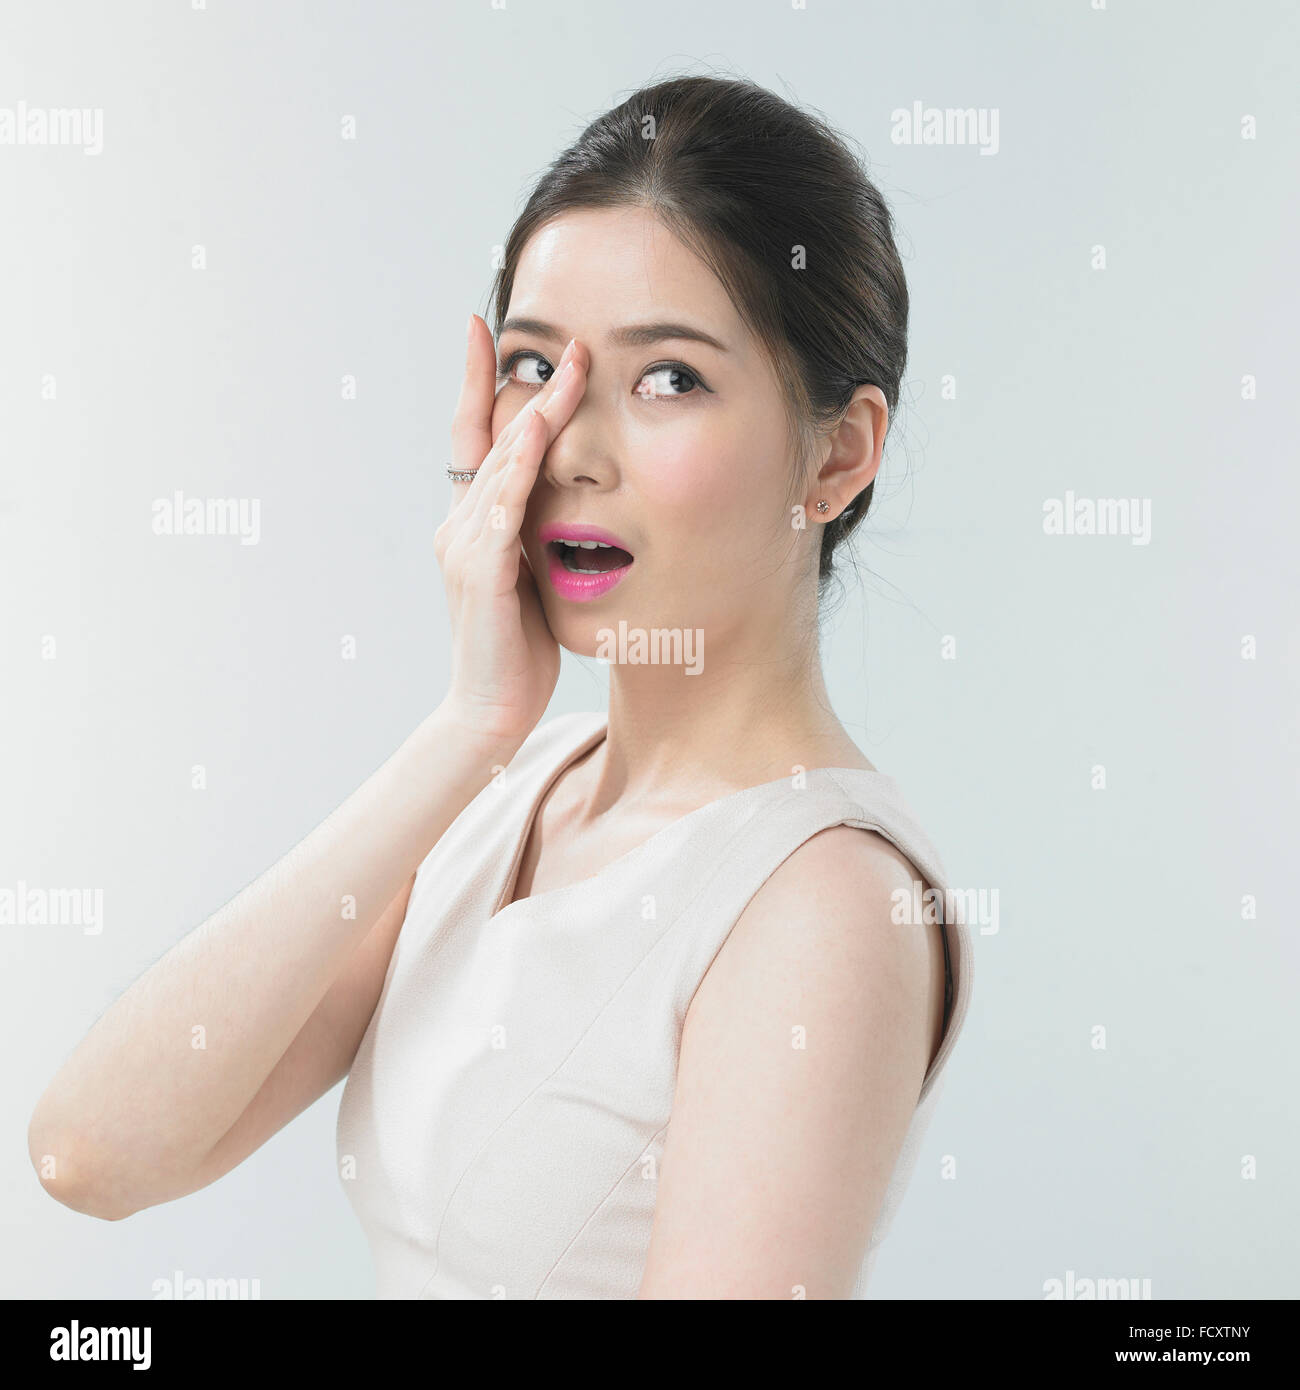 Portrait of young woman with pink lips covering half face looking up Stock Photo